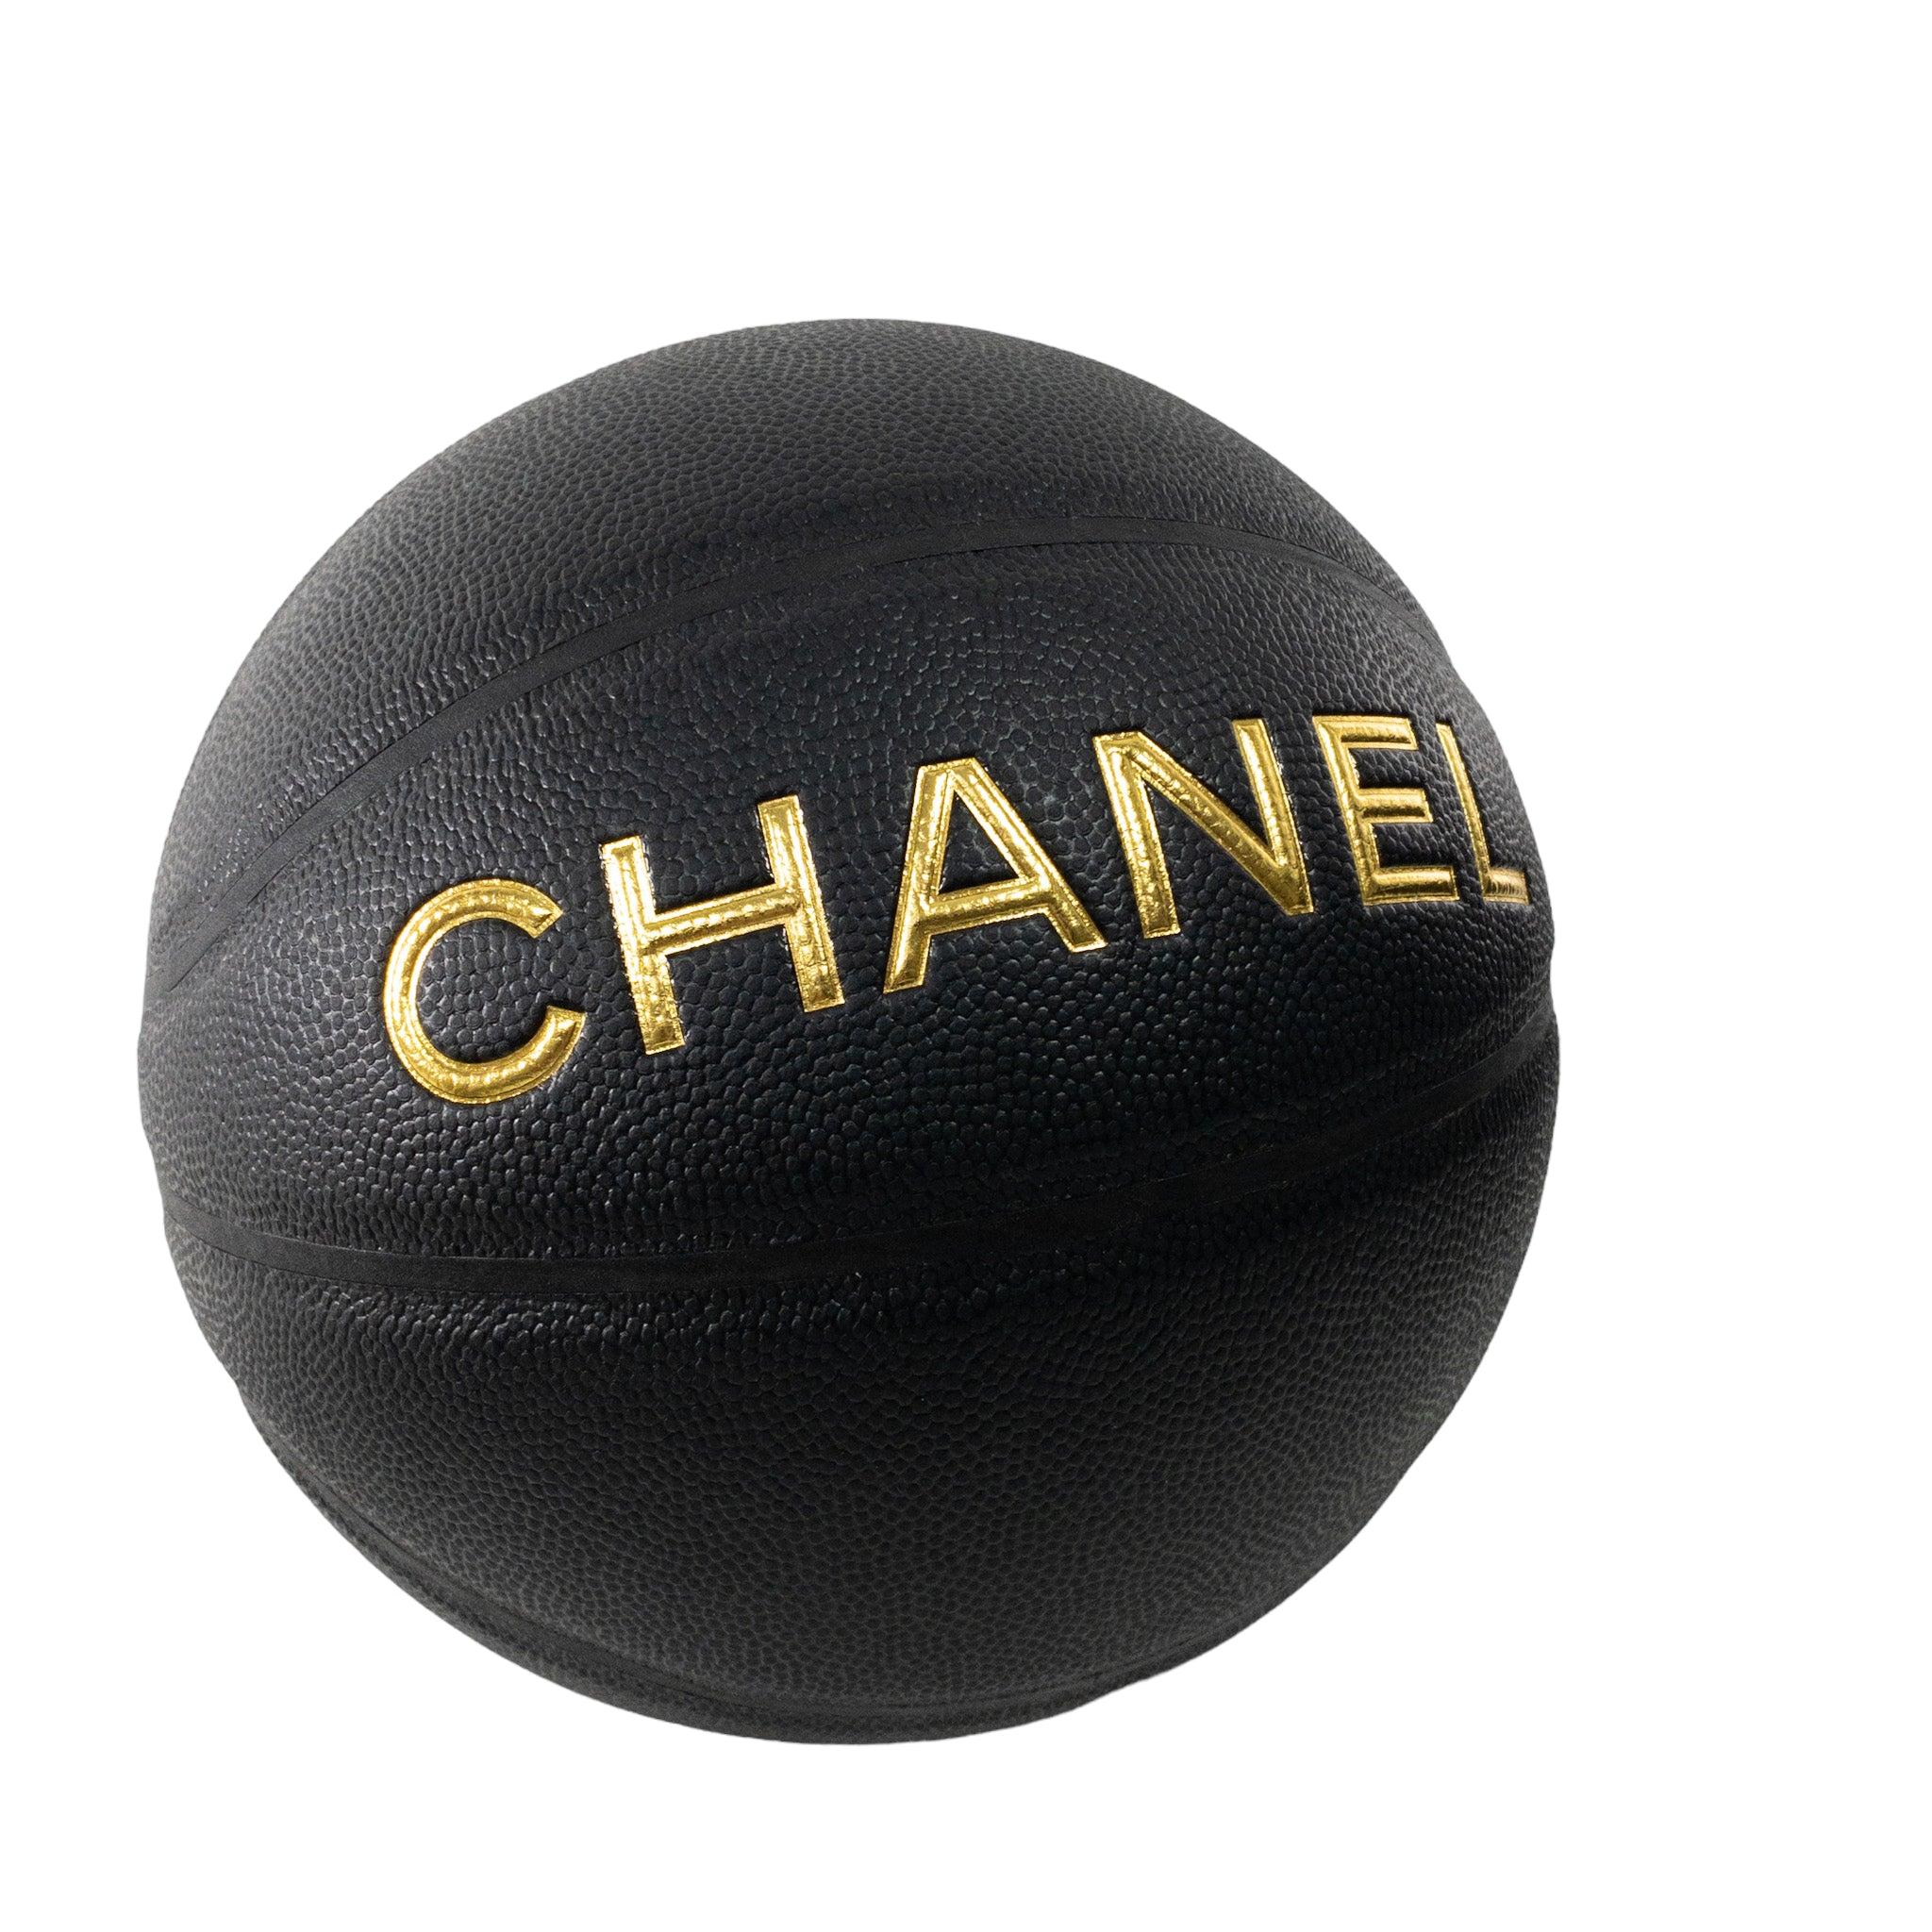 Chanel Limited Edition Basketball with Chain Harness, 2019 For Sale 3